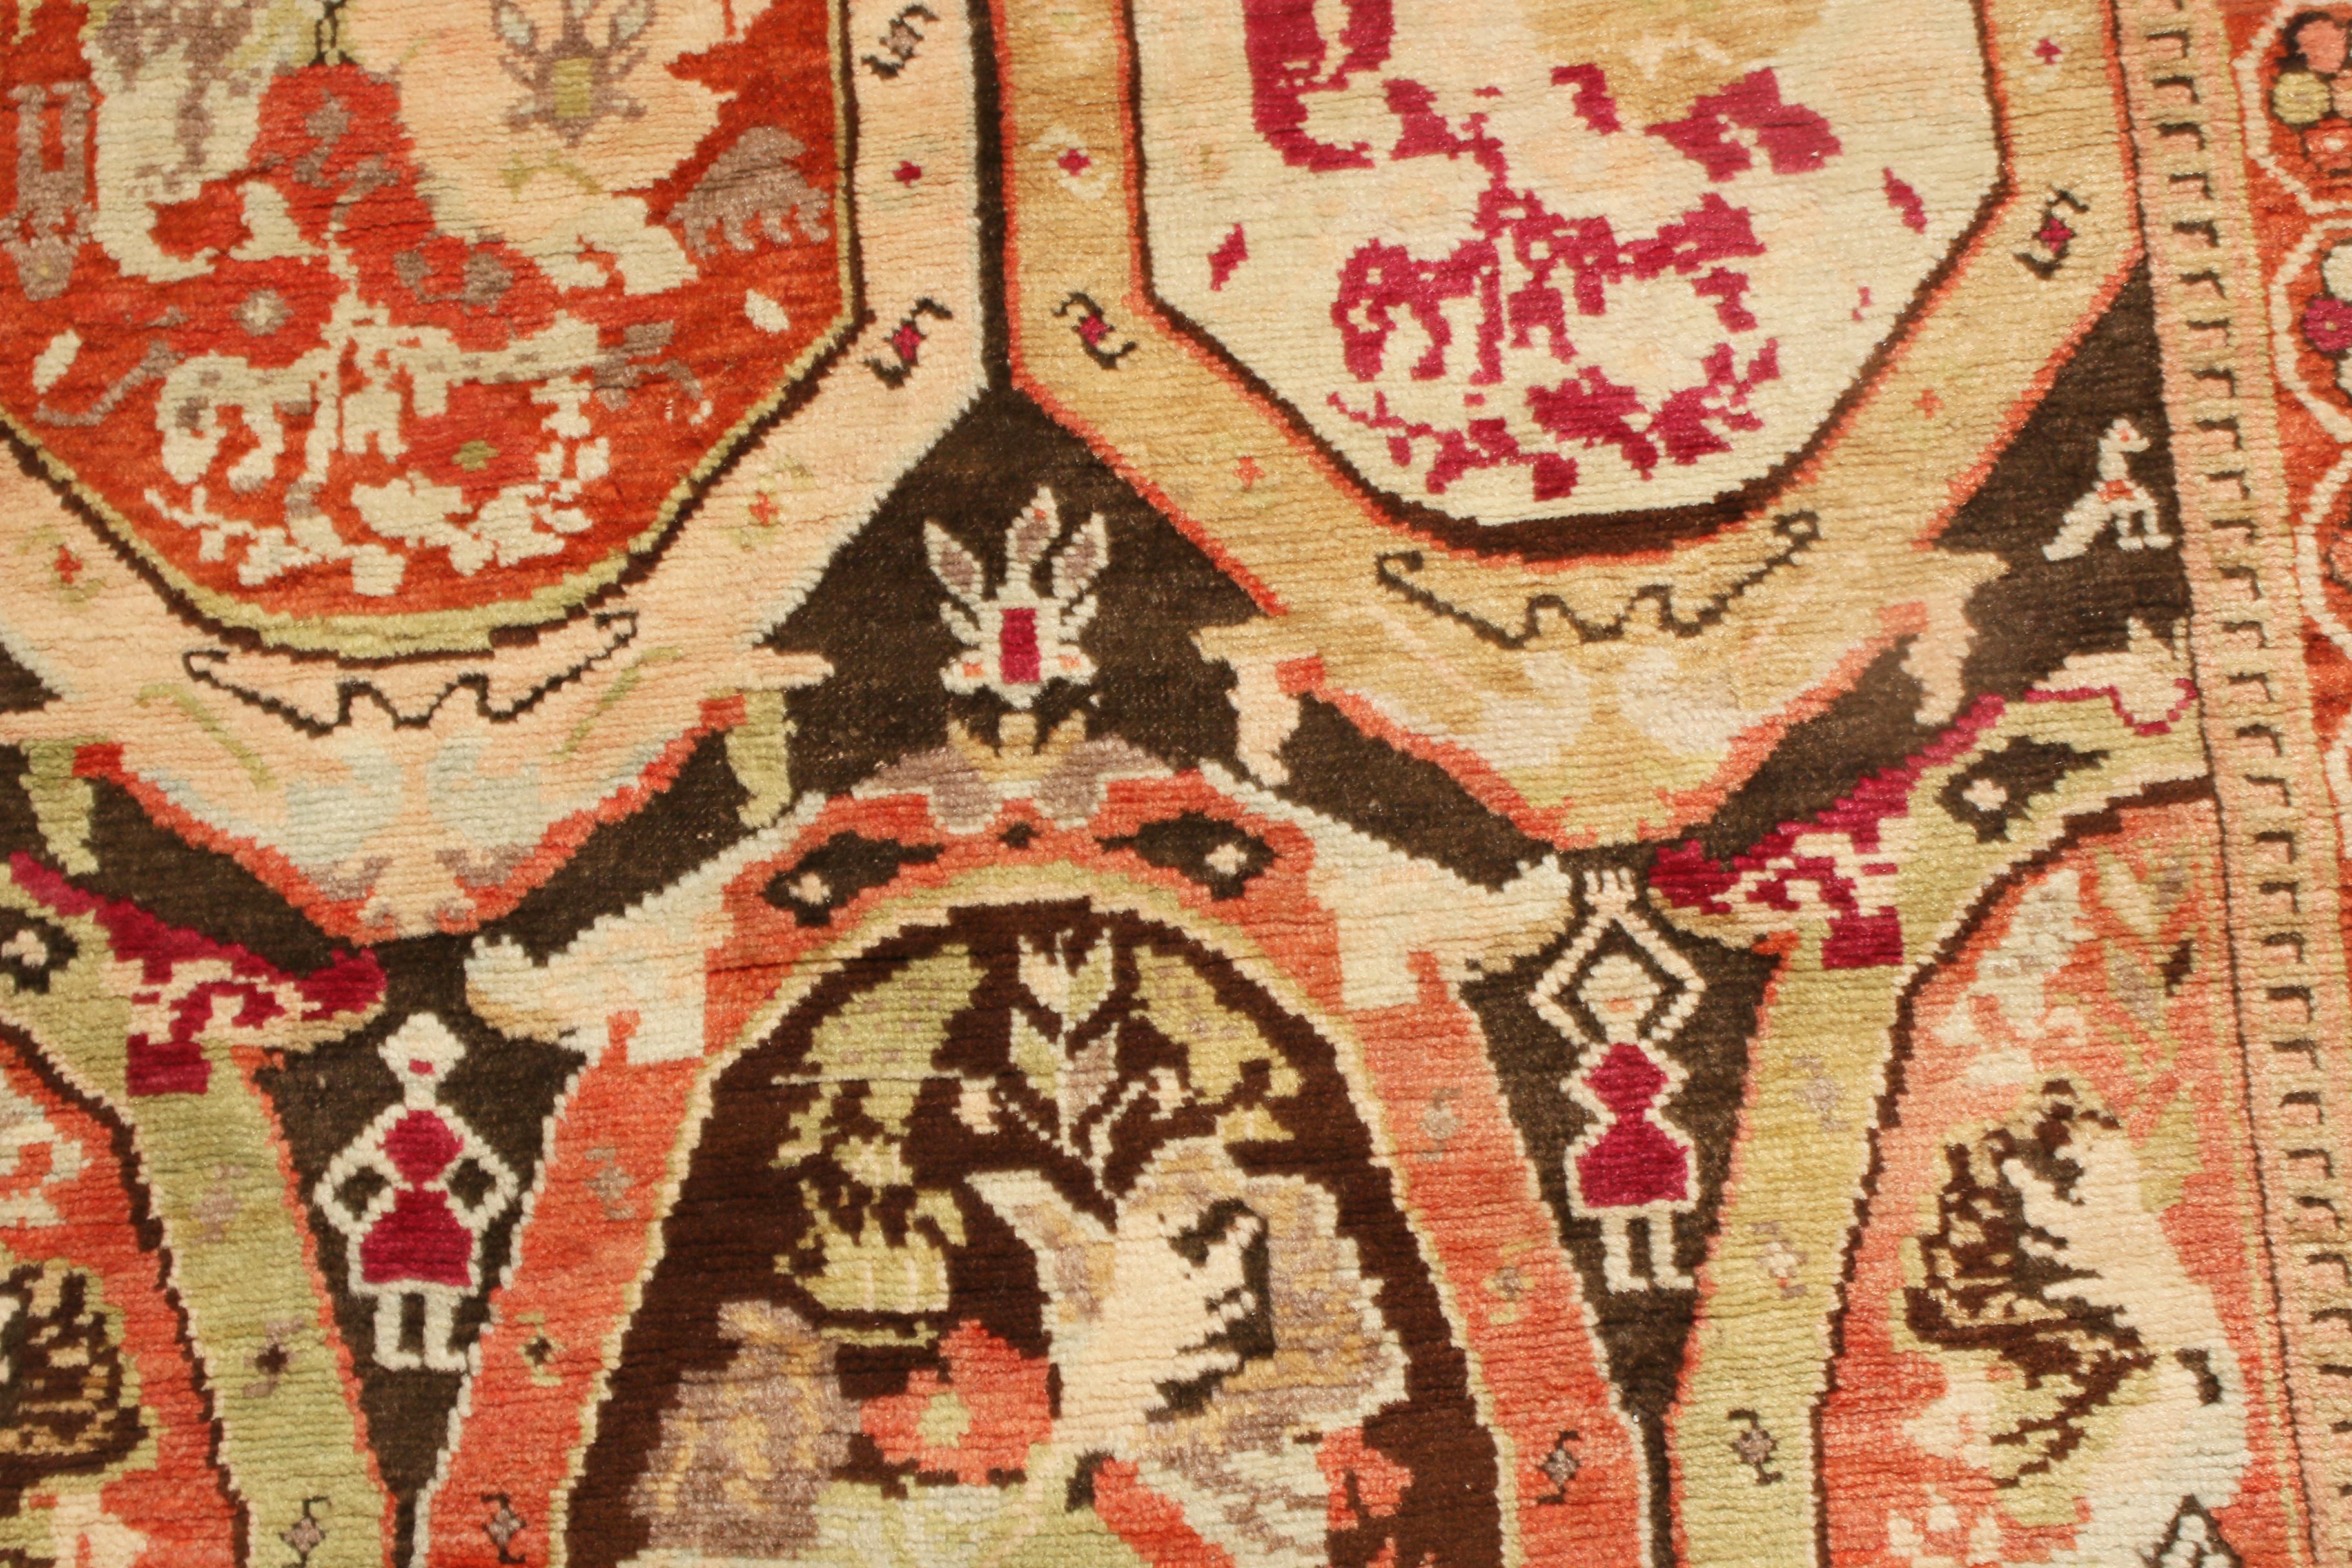 Hand-Knotted Antique Karabagh Magenta and Brown Wool Runner